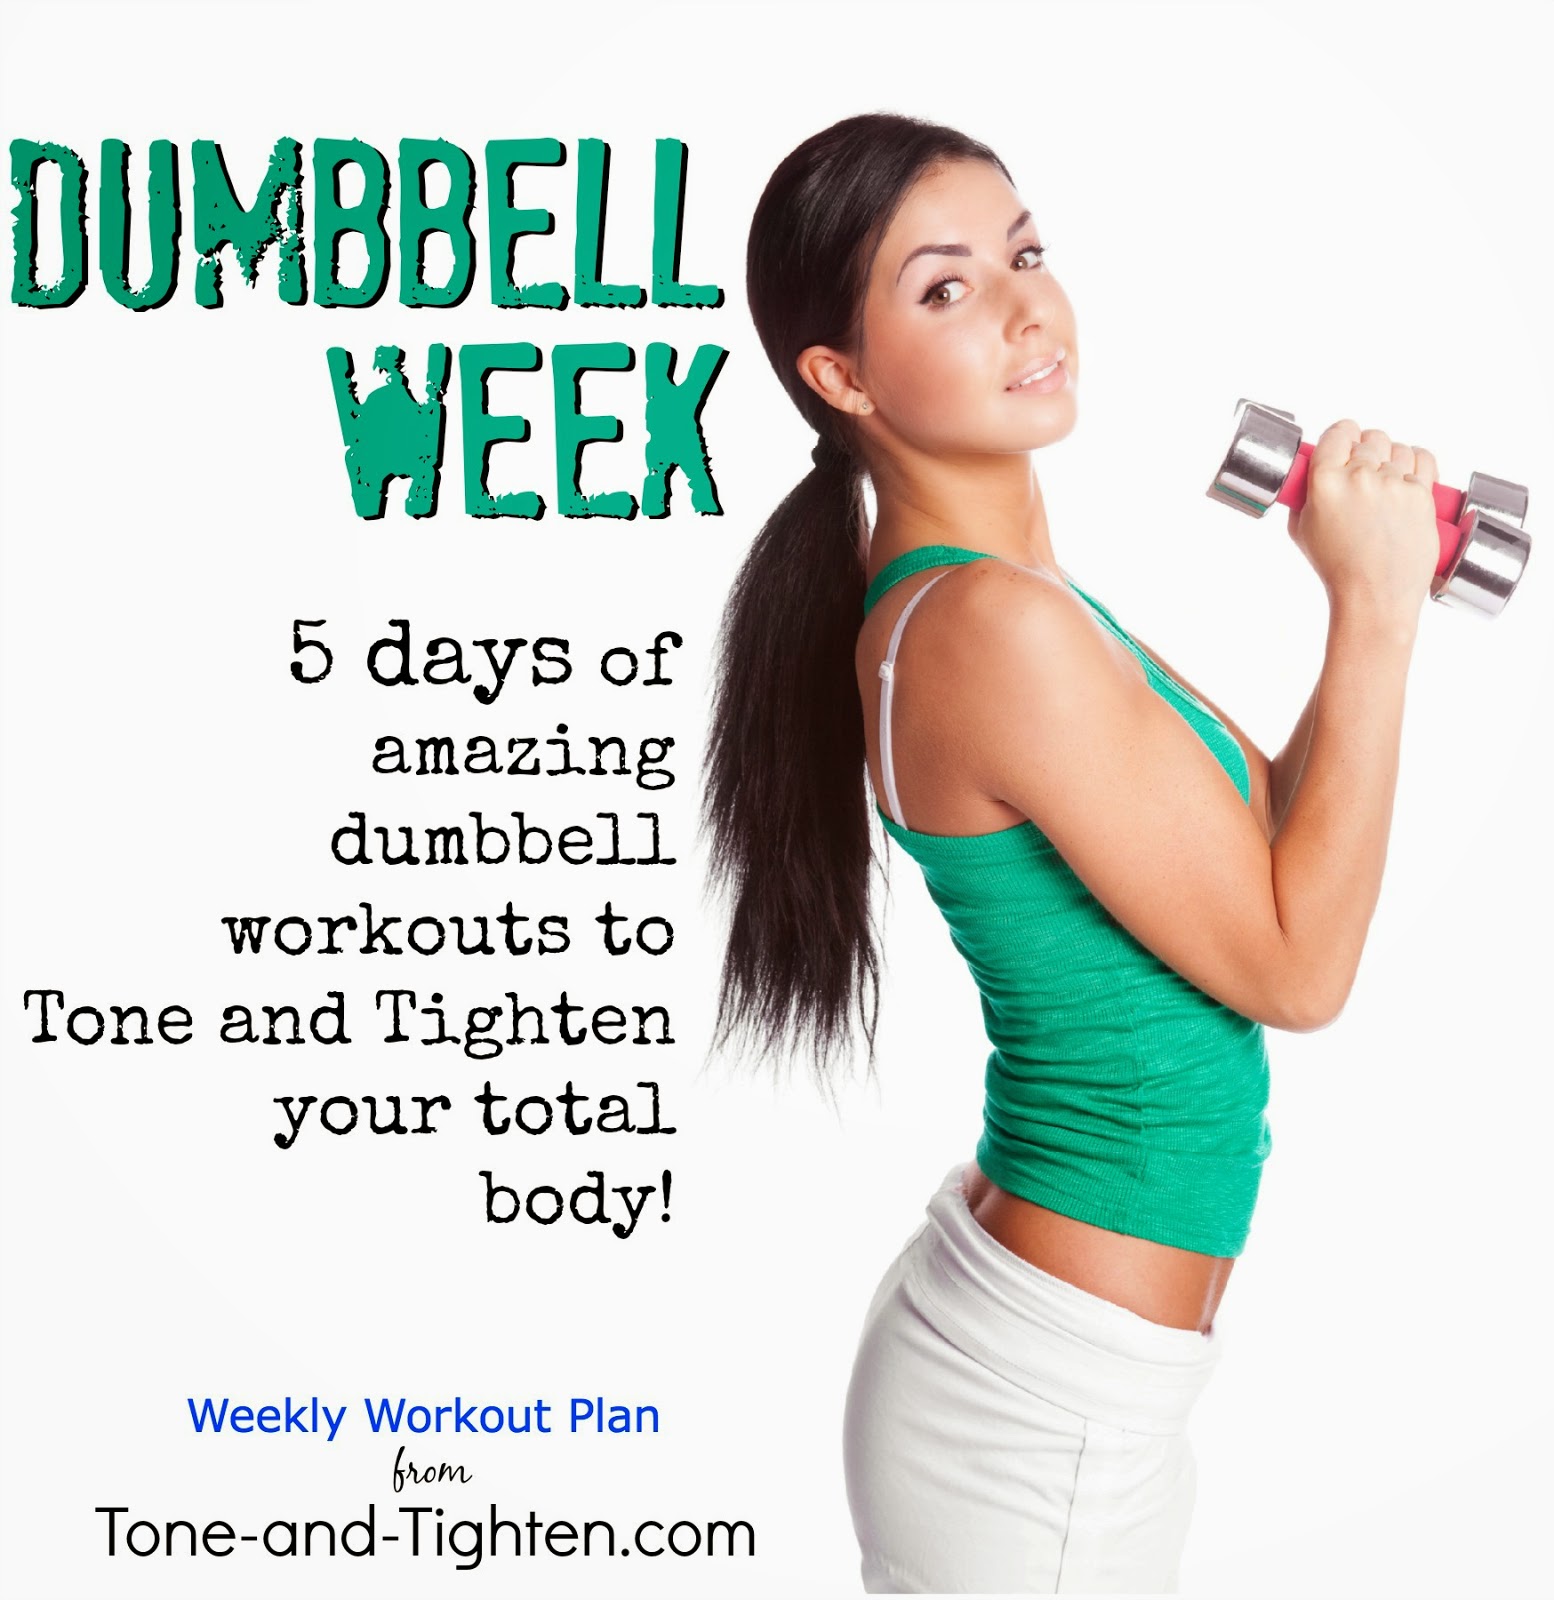 Weekly Workout Plan – 5 days of dumbbell workouts to tone and tighten your total body! – Best dumbbell exercises